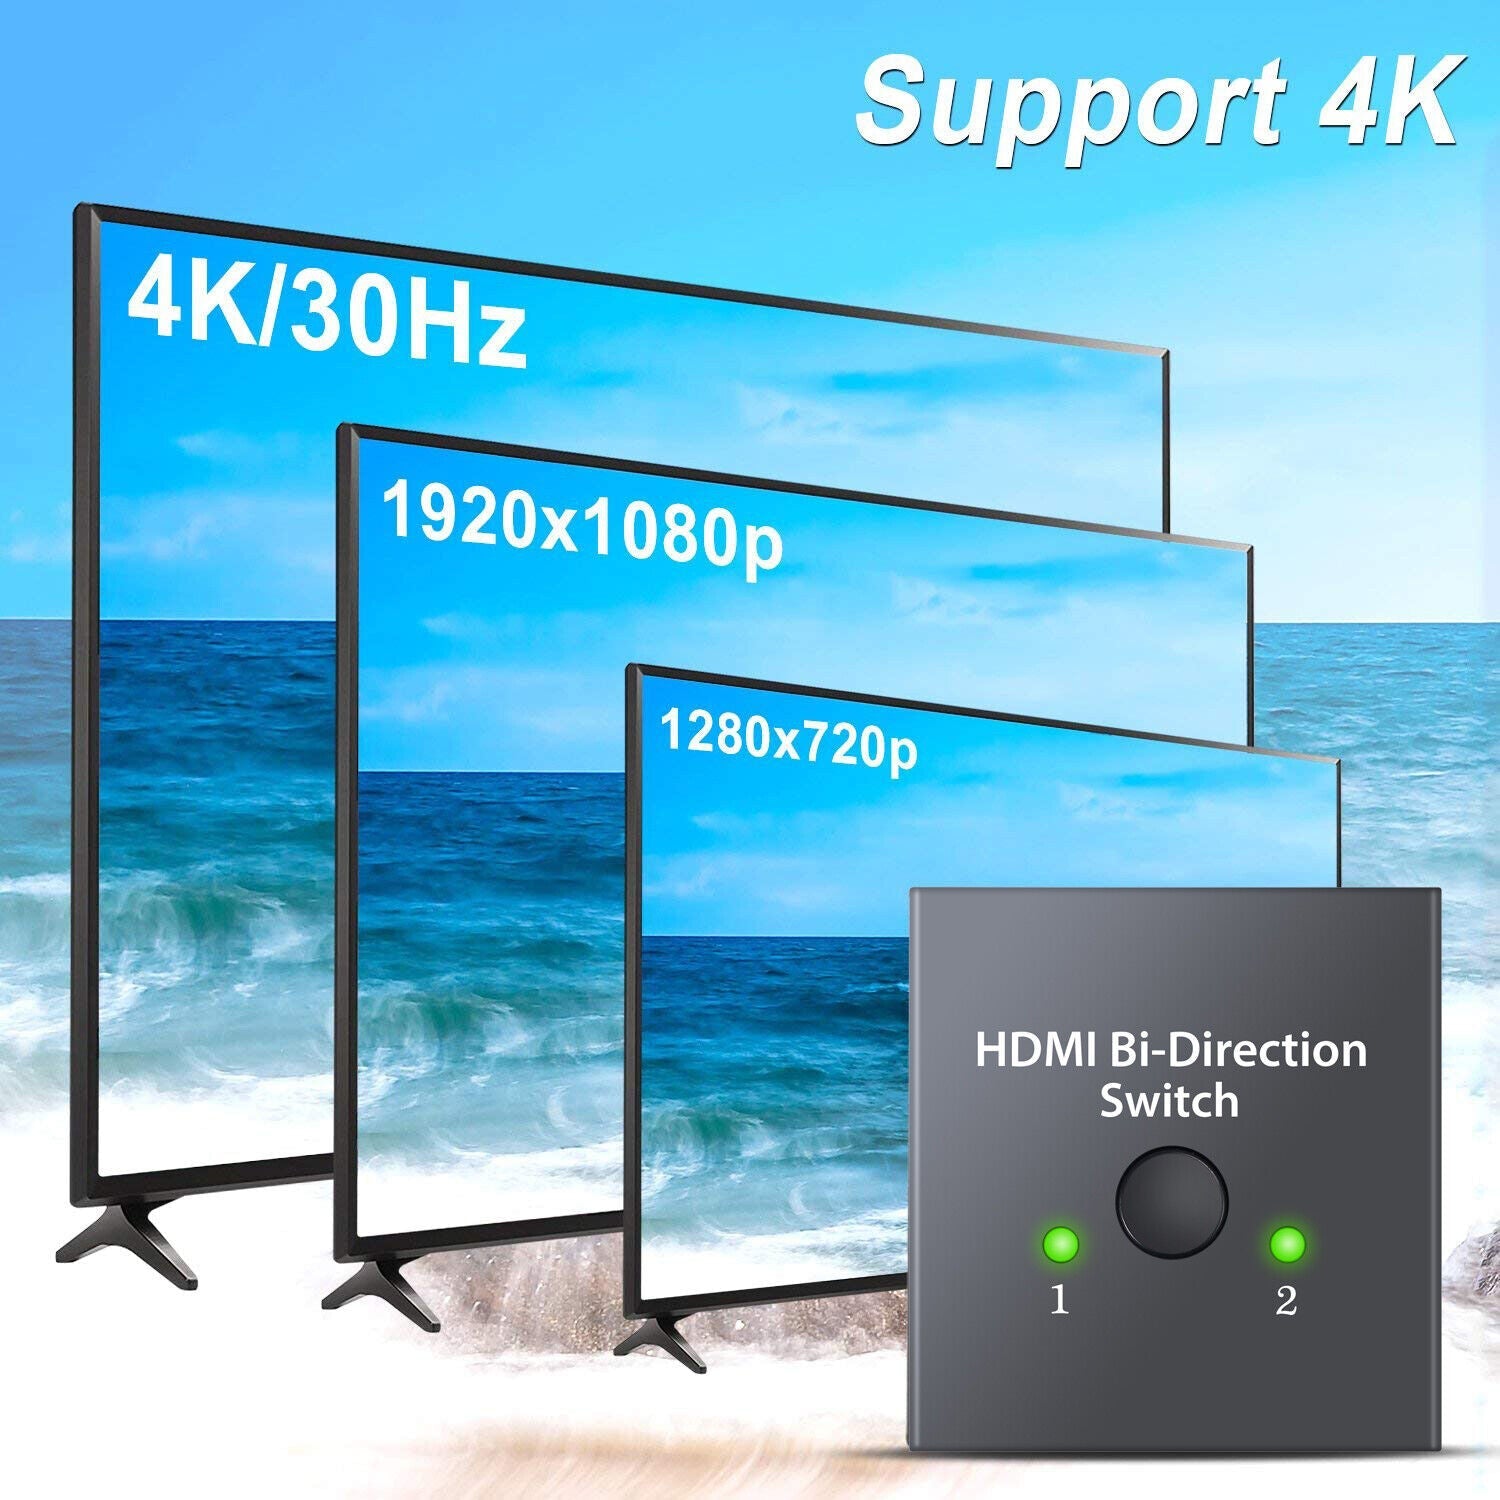 4K HDMI Switcher 2 Ports Bi-direction Manual Switch 2 Input to 1 Output for HDTV